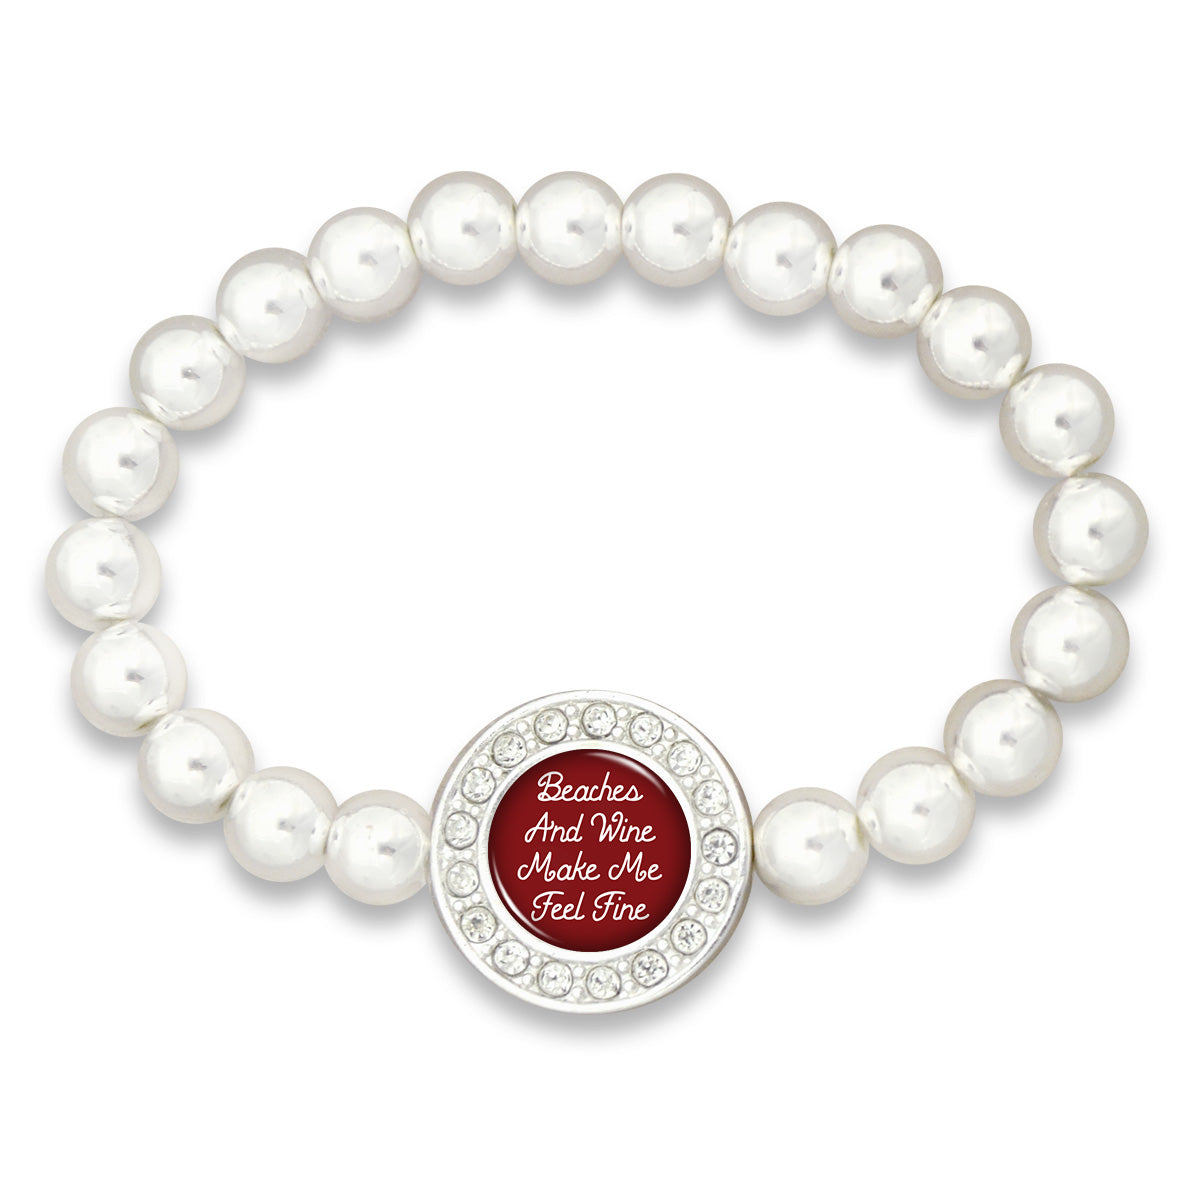 "Beaches and Wine Make Me Feel Fine" Silver Beaded Stretch Bracelet